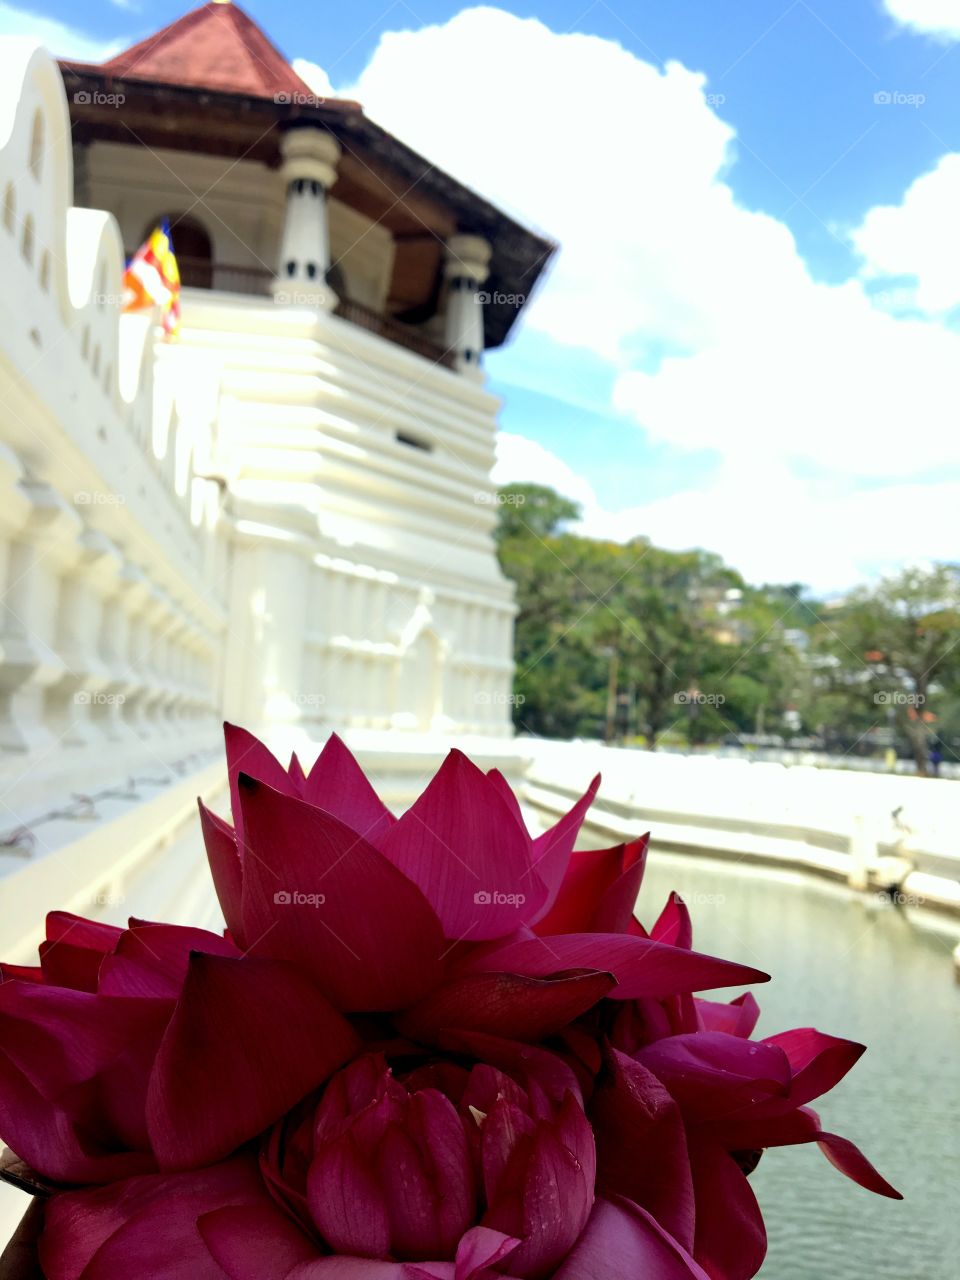 Sri Dalada Maligwa .The Buddhist temple is a place of tranquility and peace of mind